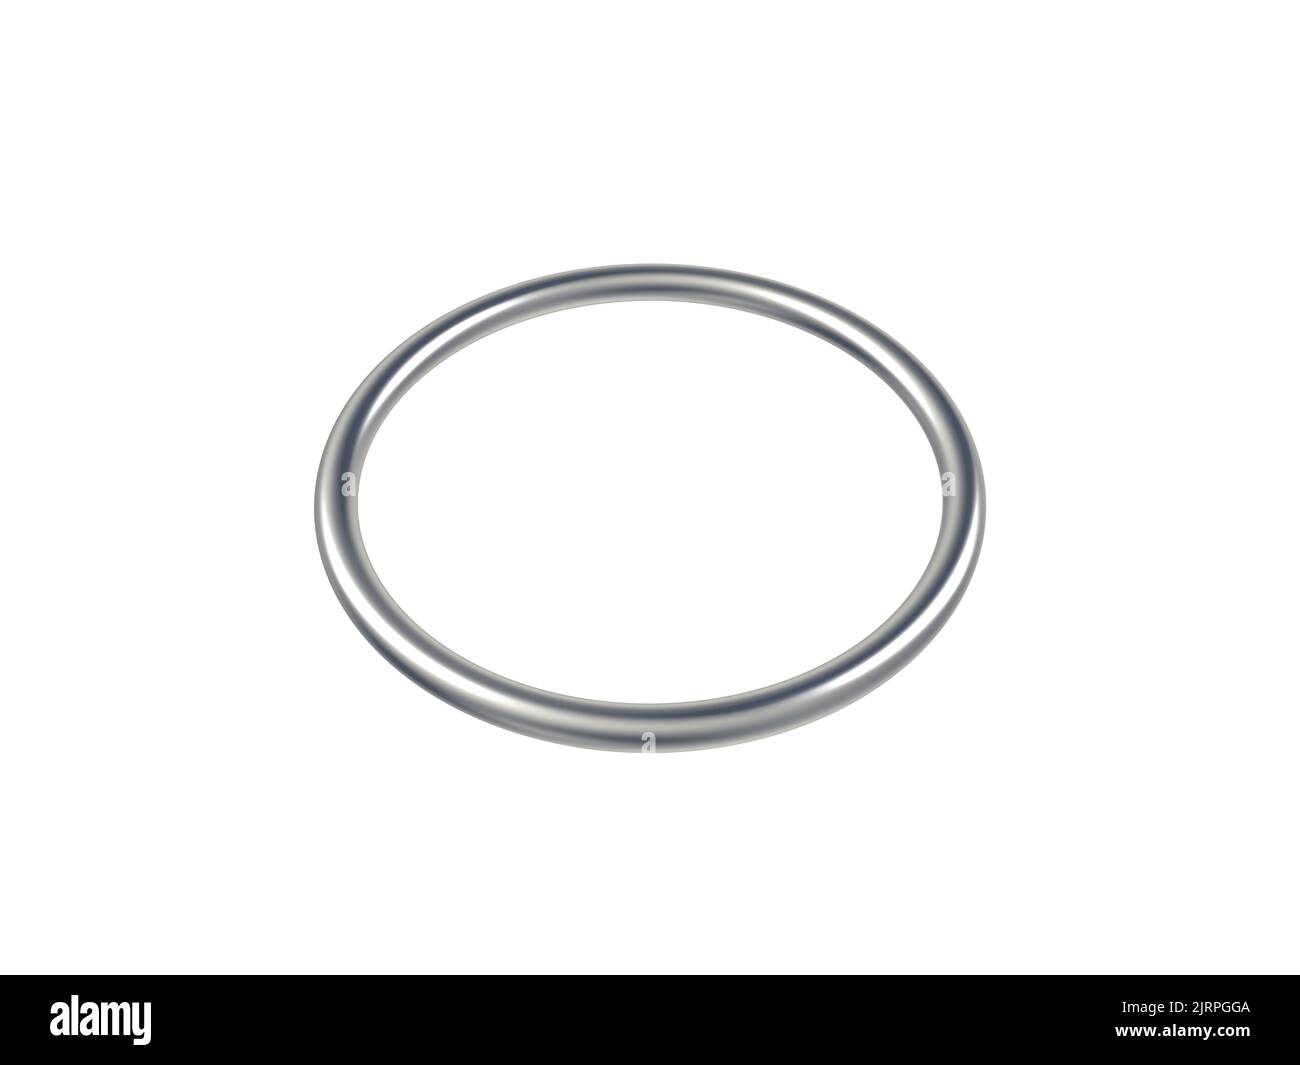 Metal ring isolated on white background. 3d illustration. Stock Photo